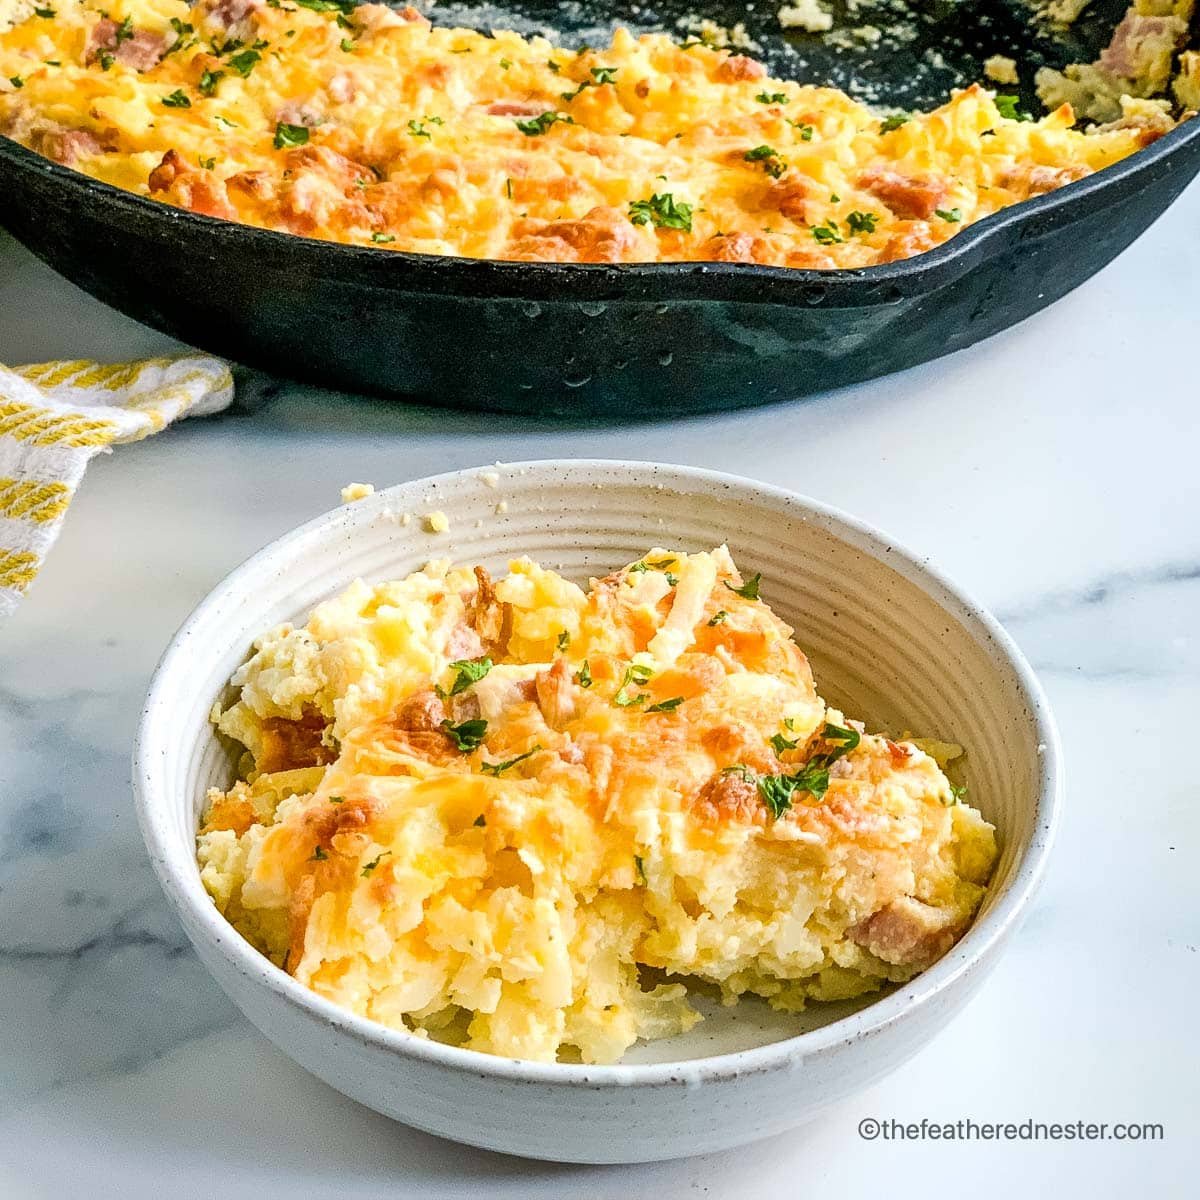 breakfast casserole in the bowl and ready to serve.